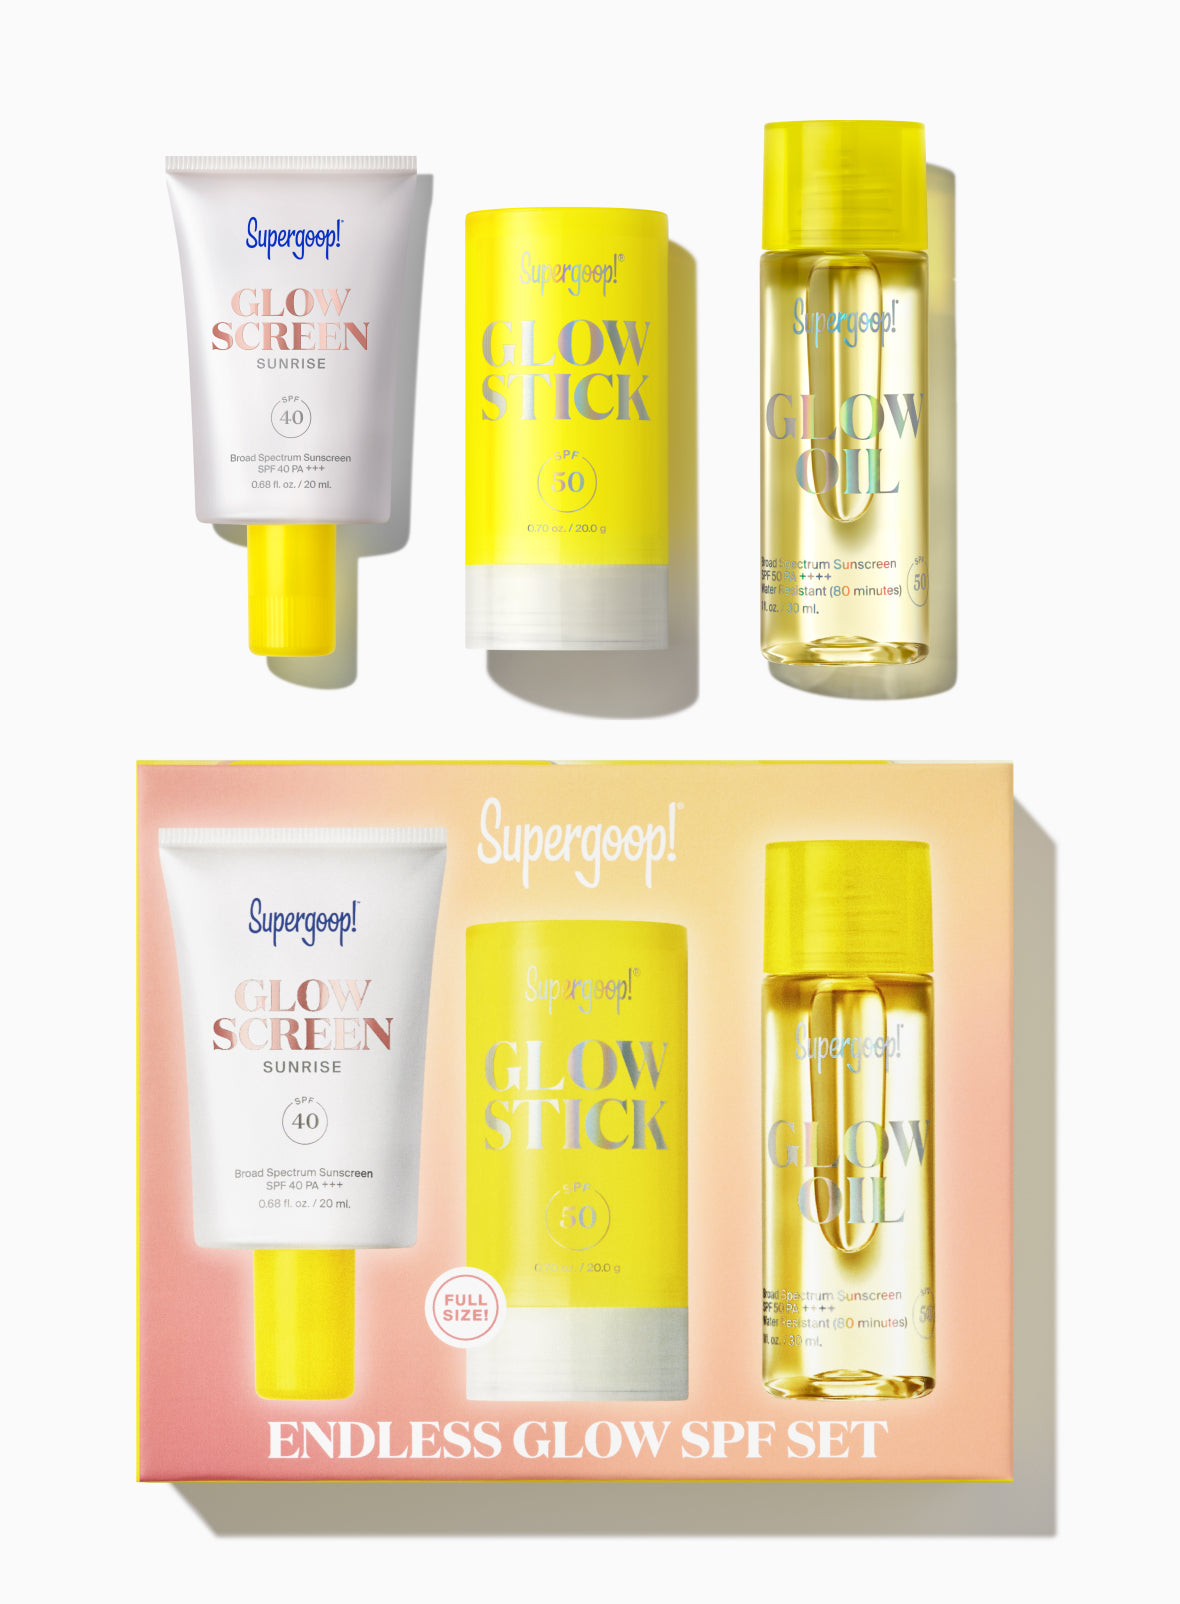 Supergoop Endless Glow Spf Set Sunscreen ! In White